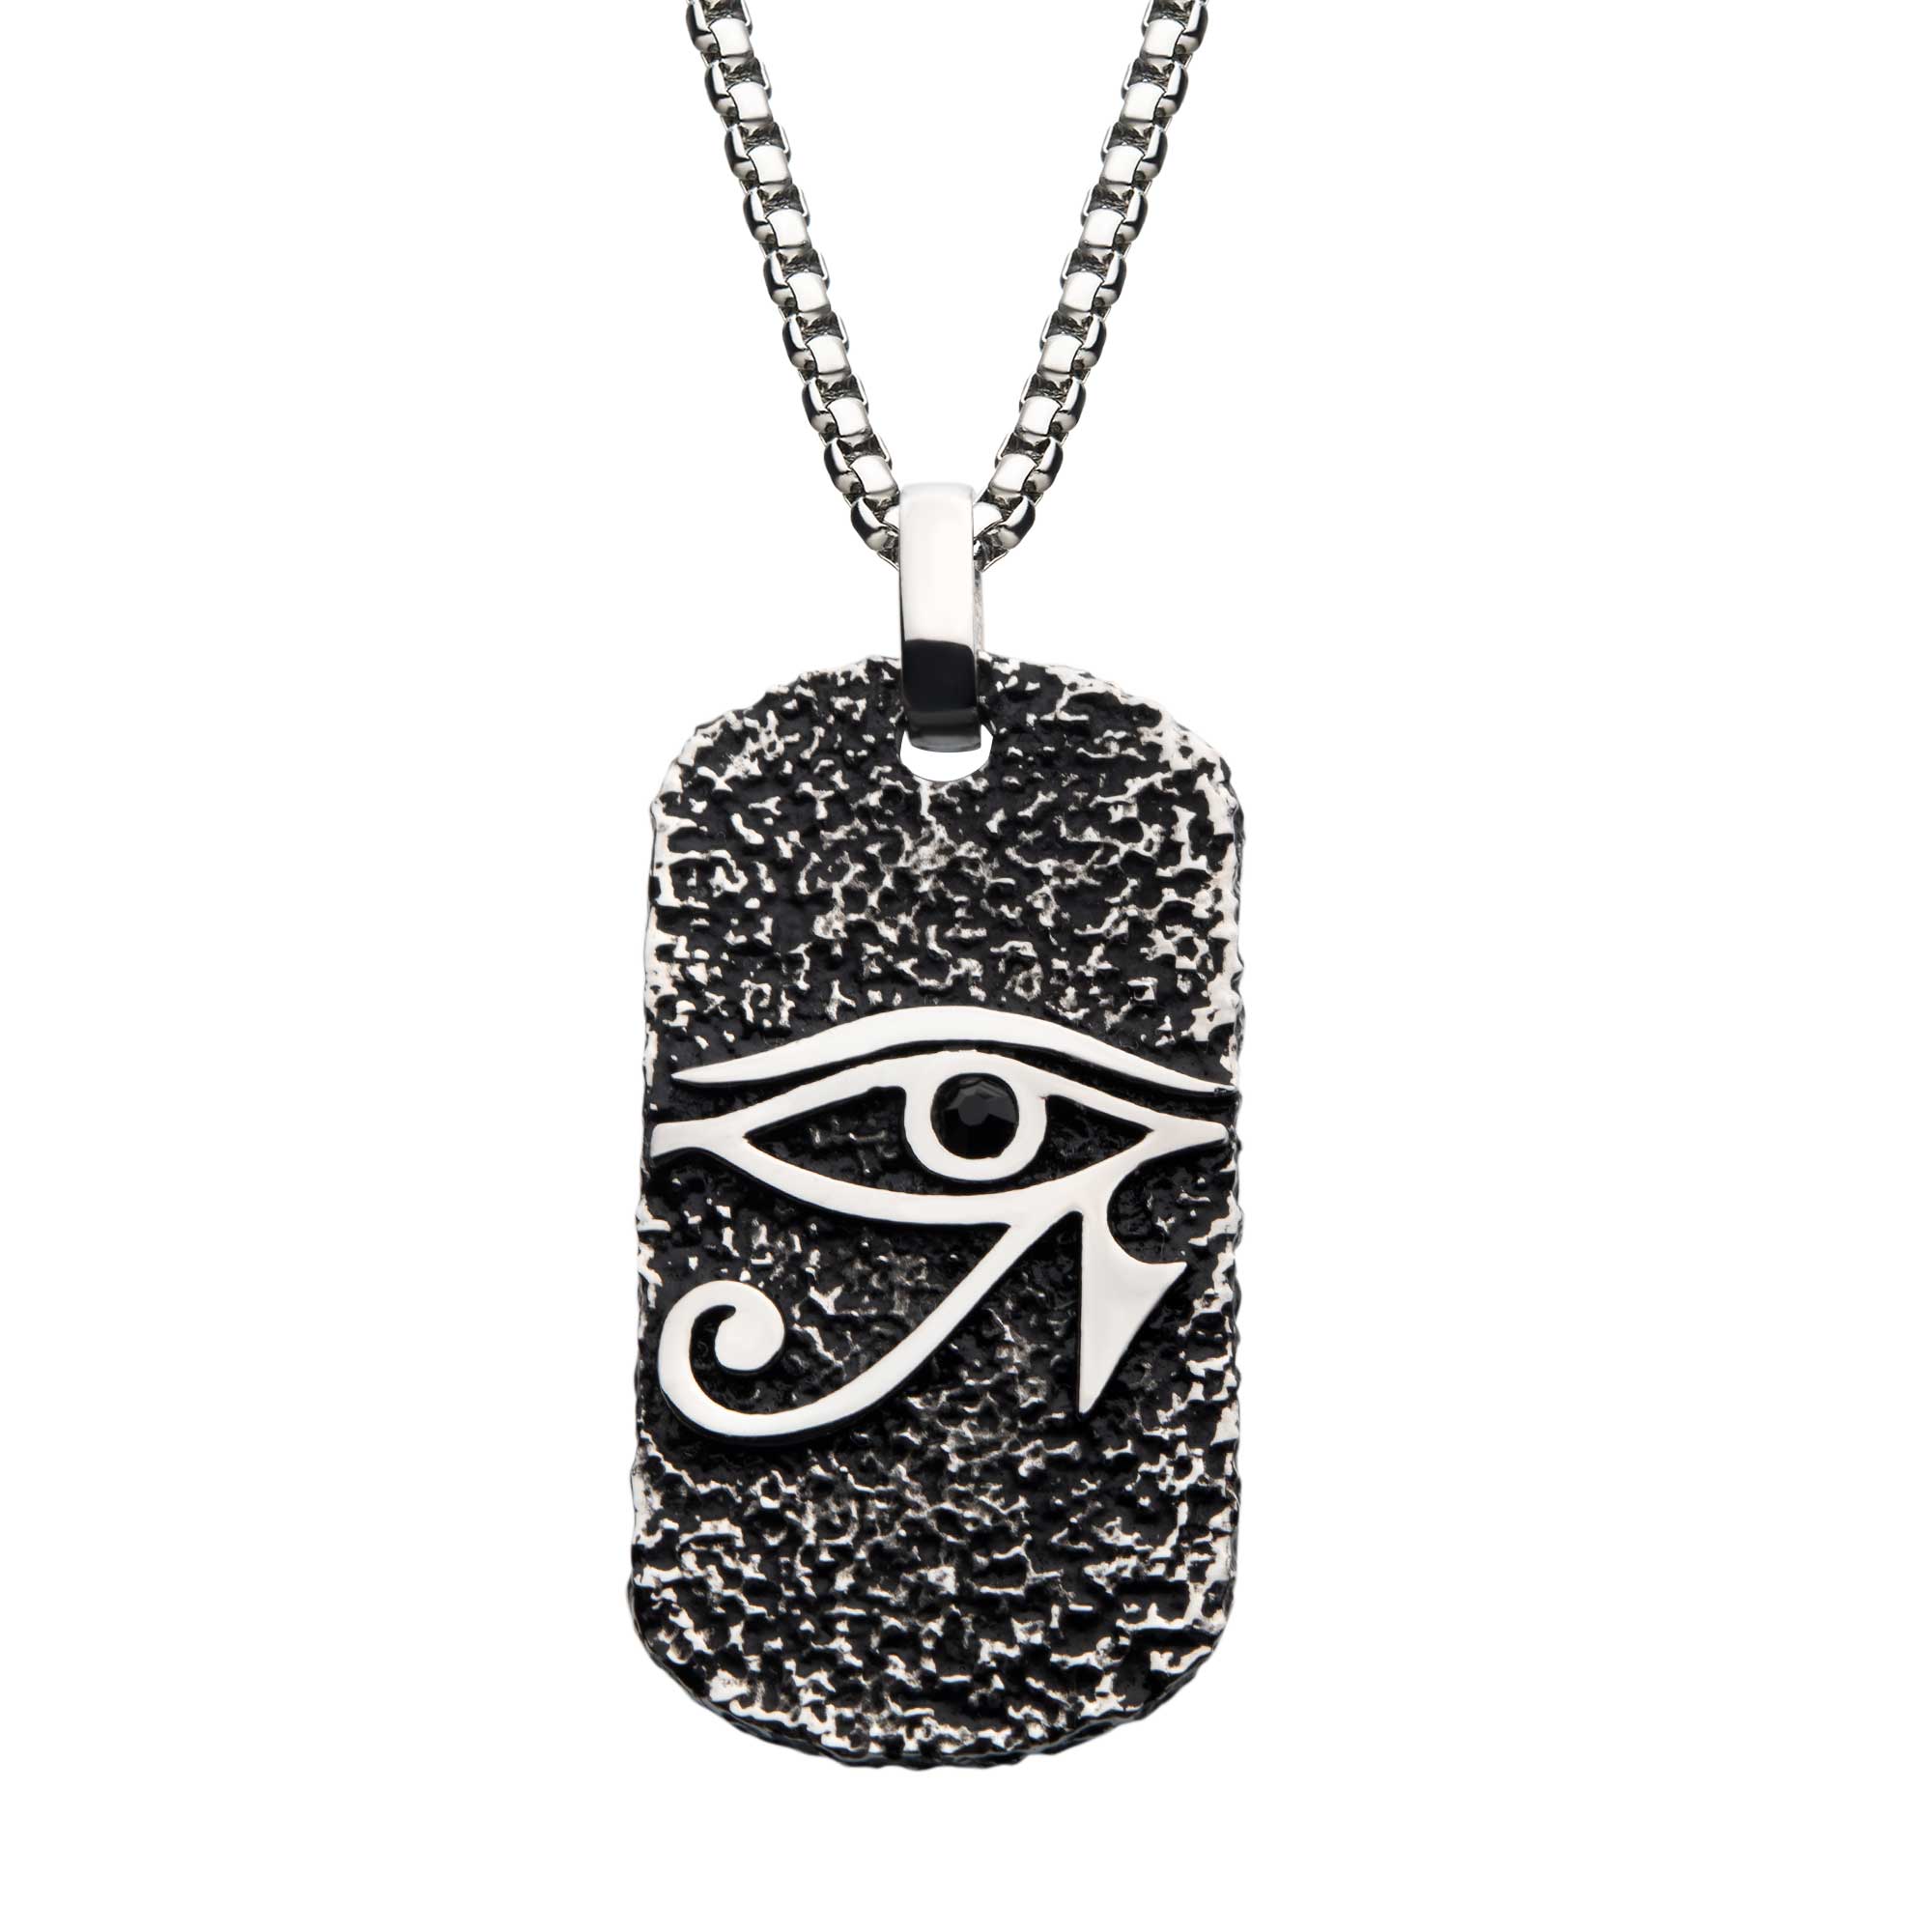 Black Oxidized Stainless Steel with Black CZ Eye of Horus Dog Tag Pendant, with Steel Box Chain Enchanted Jewelry Plainfield, CT